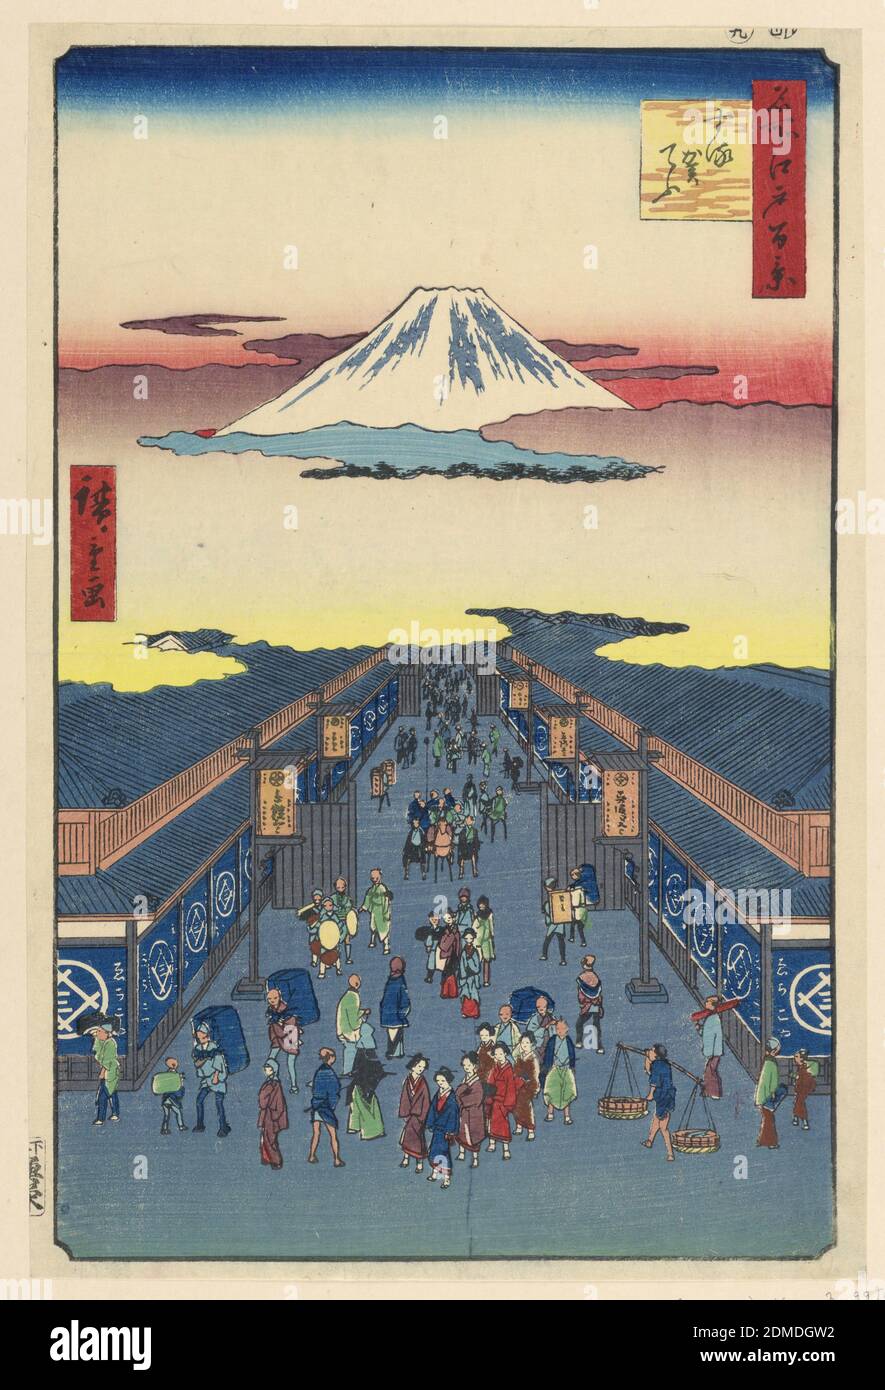 Suruga Street (Suruga-cho) From the Series One Hundred Famous views of Edo, Ando Hiroshige, Japanese, 1797–1858, Woodblock print in colored ink on paper, The main street of Suraga-Cho, which is the old name of the province where Mount Fuji is located, appears to lead right up to the base of the mountain. The traditional Japanese cloud divides the print into thirds. The lower half of the print shows buildings of the predecessor to the Mitsukoshi chain of department stores. This textile retail business was the first to sell goods at fixed prices. Among the street are customers and merchants Stock Photo